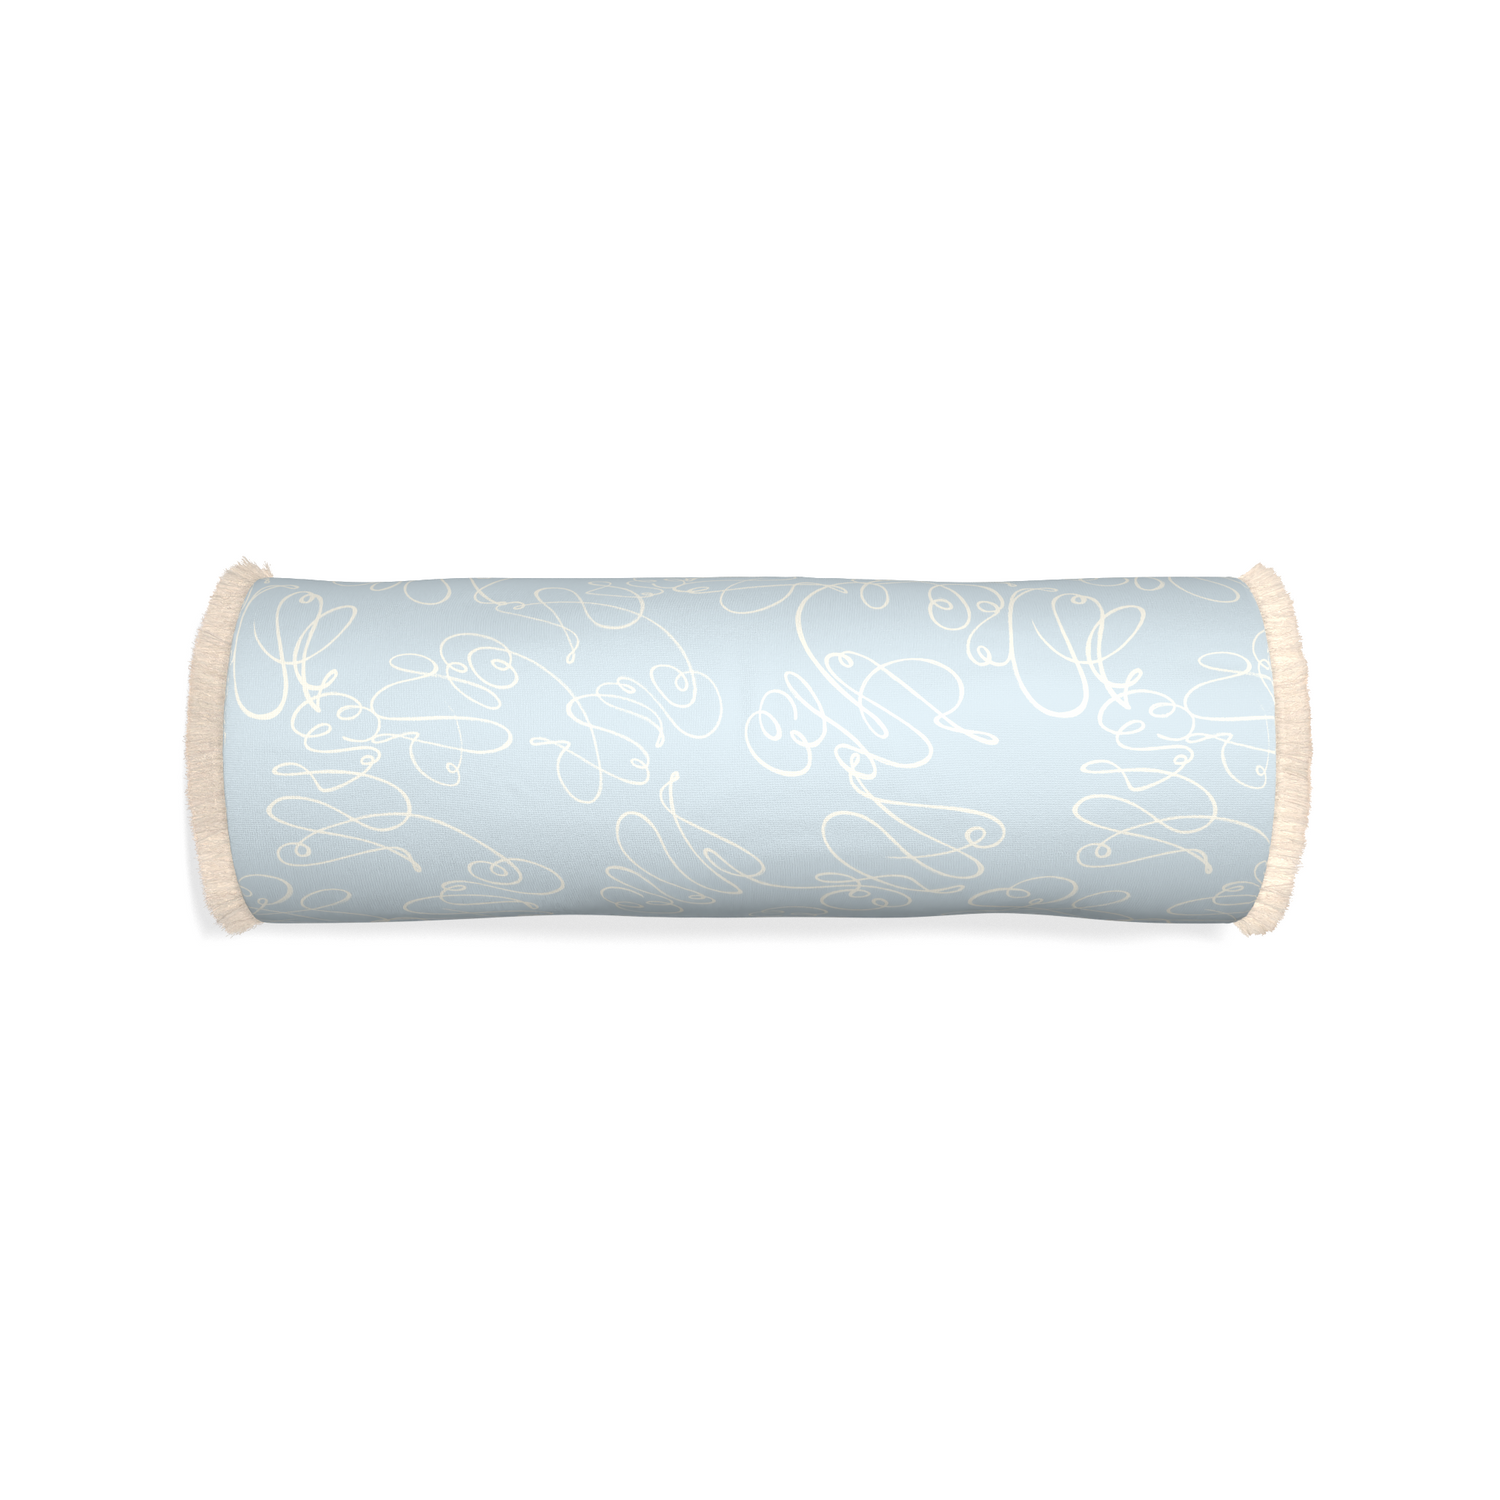 Bolster mirabella custom powder blue abstractpillow with cream fringe on white background